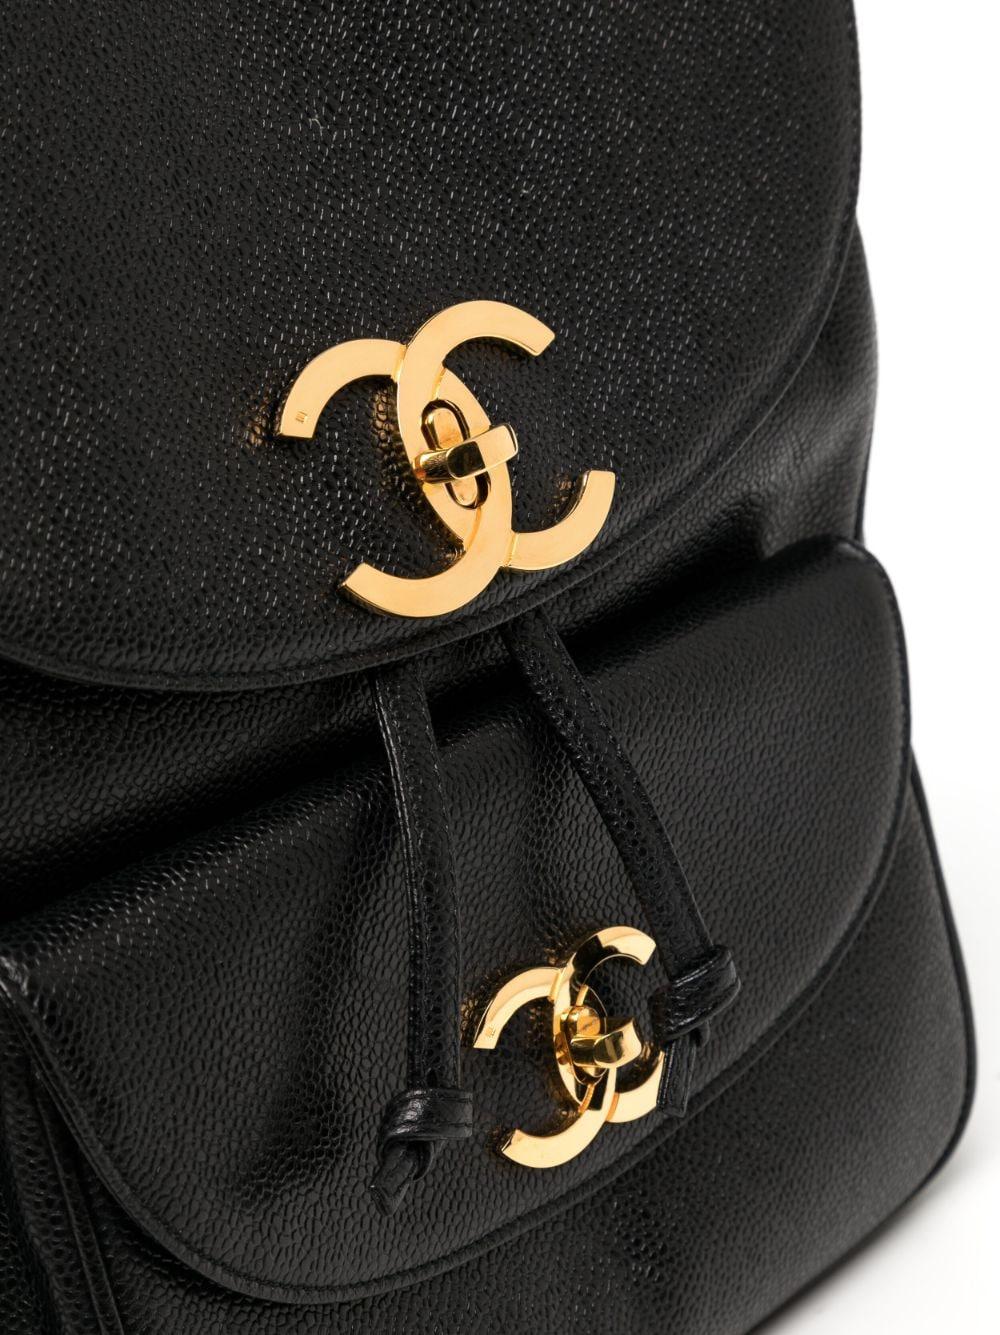 Chanel 1994 Vintage Caviar Black Leather Double Pocket Duma Backpack Bag In Good Condition For Sale In Miami, FL